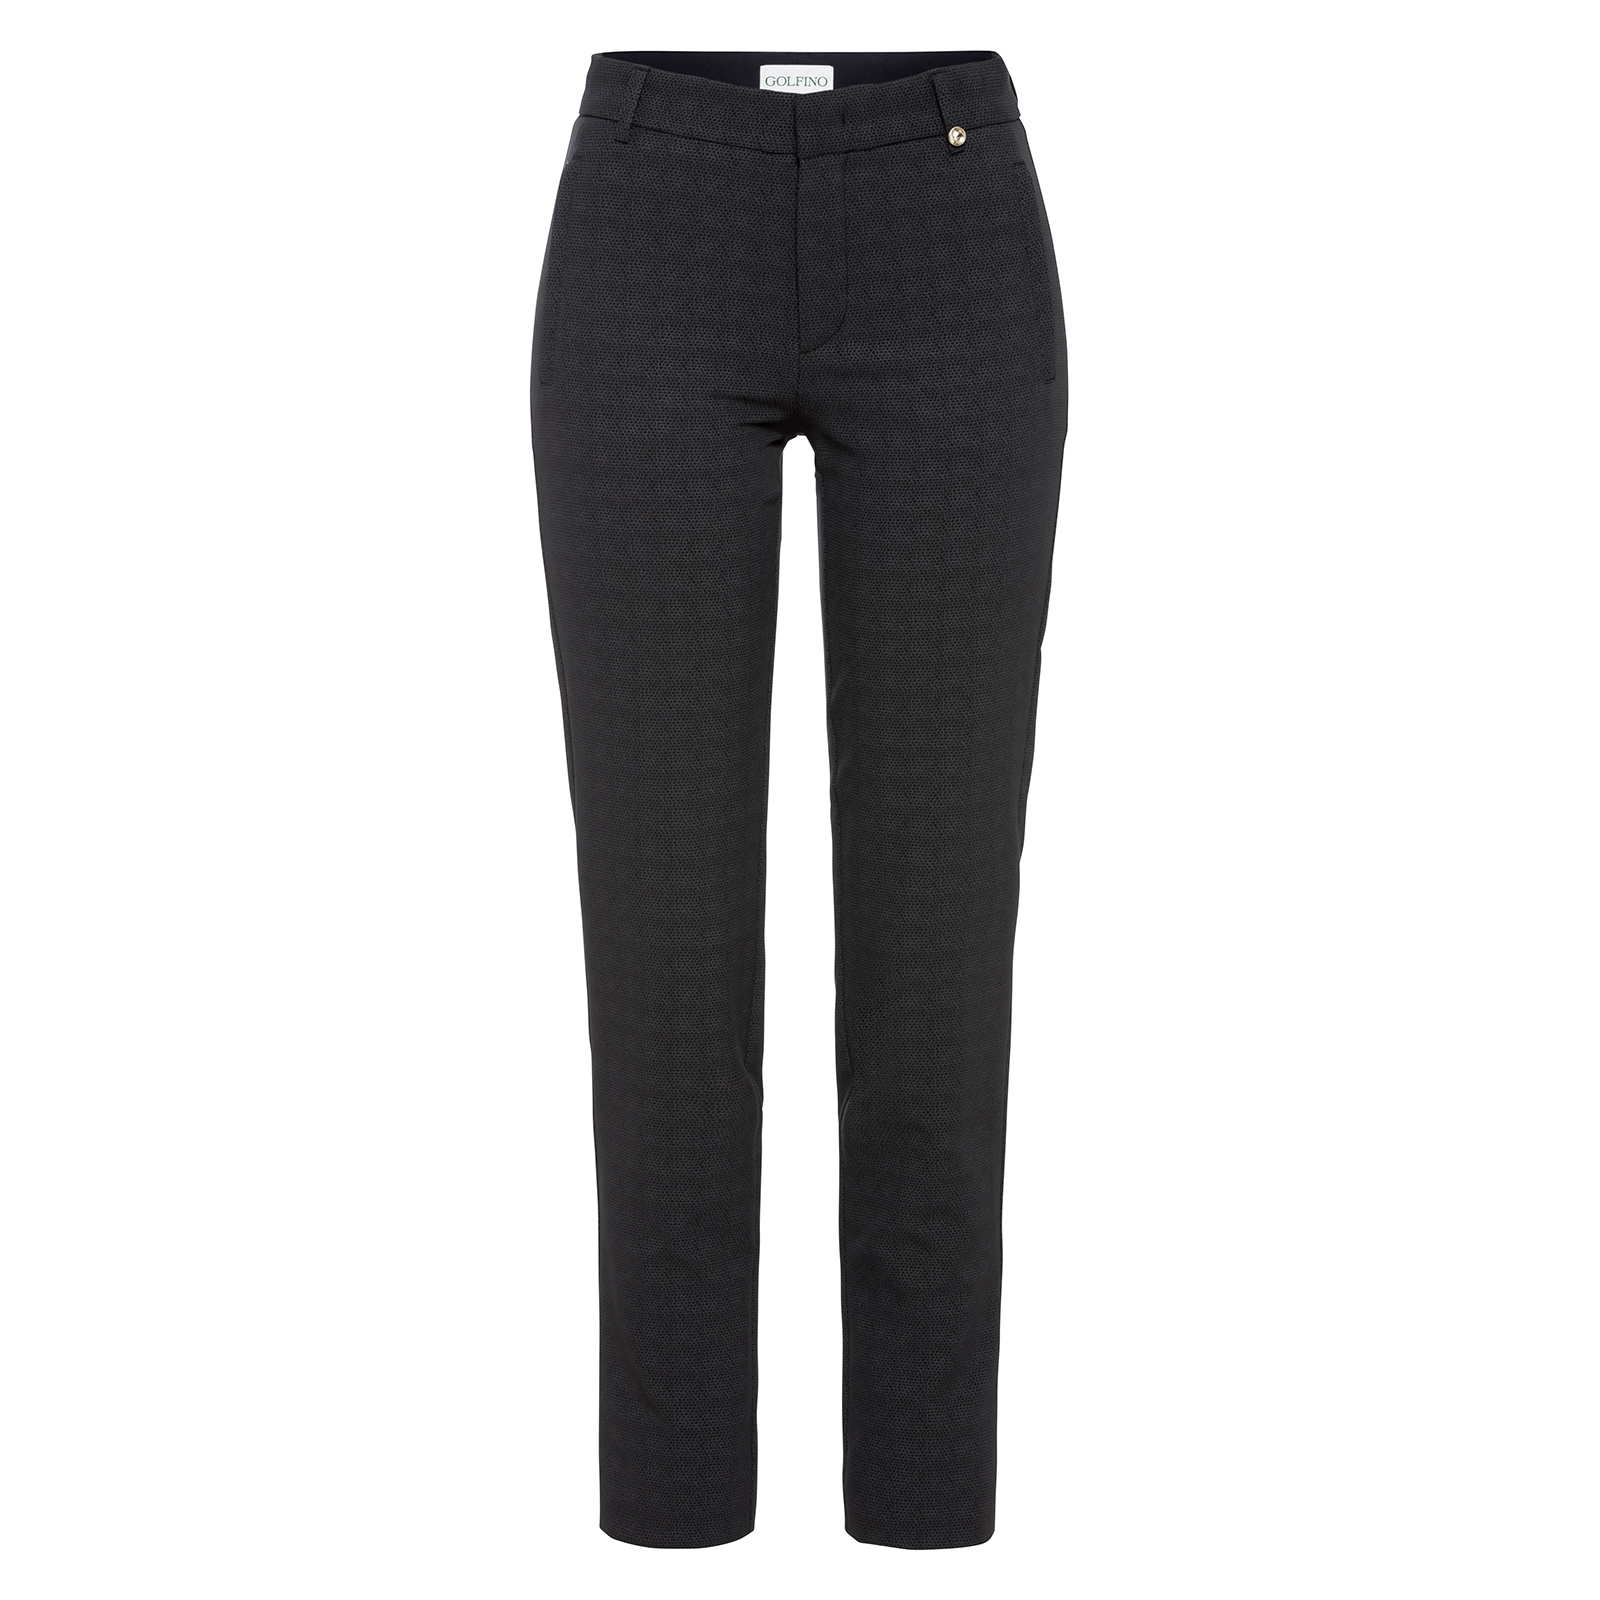 Attractive ladies' golf trousers 